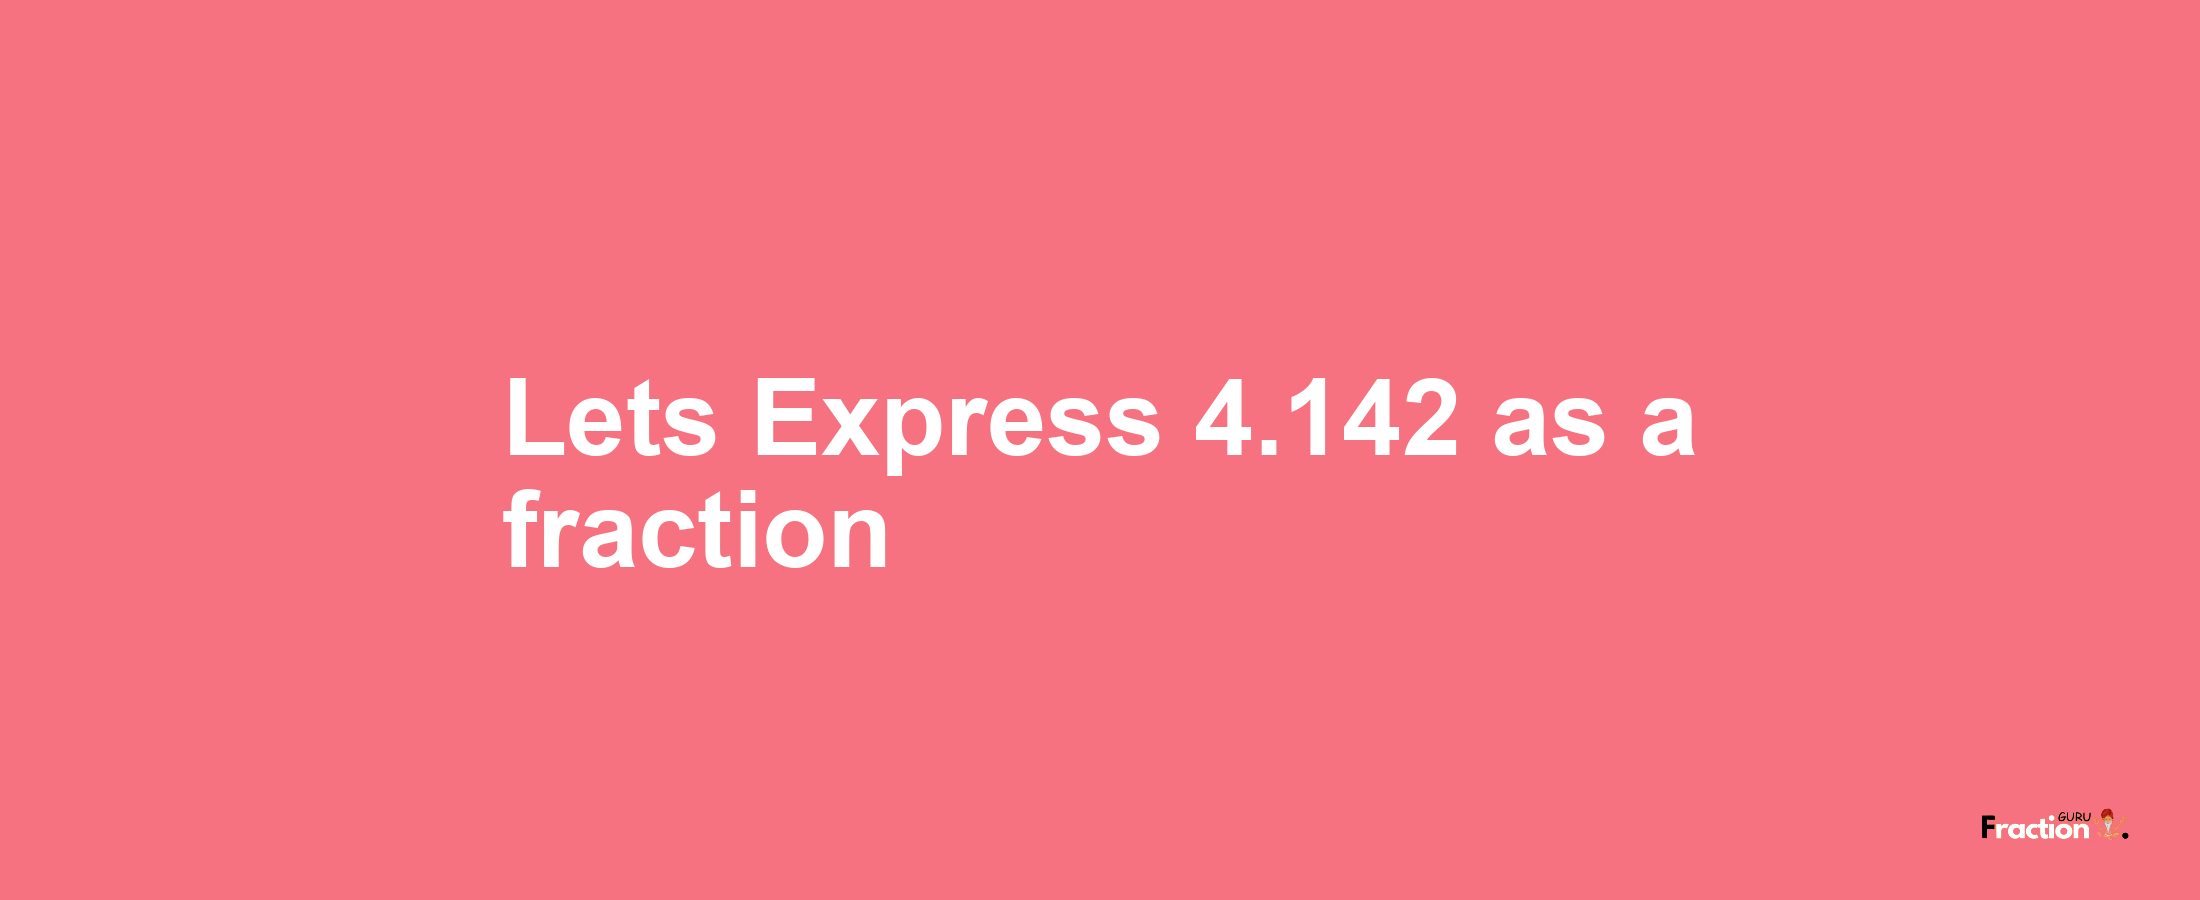 Lets Express 4.142 as afraction